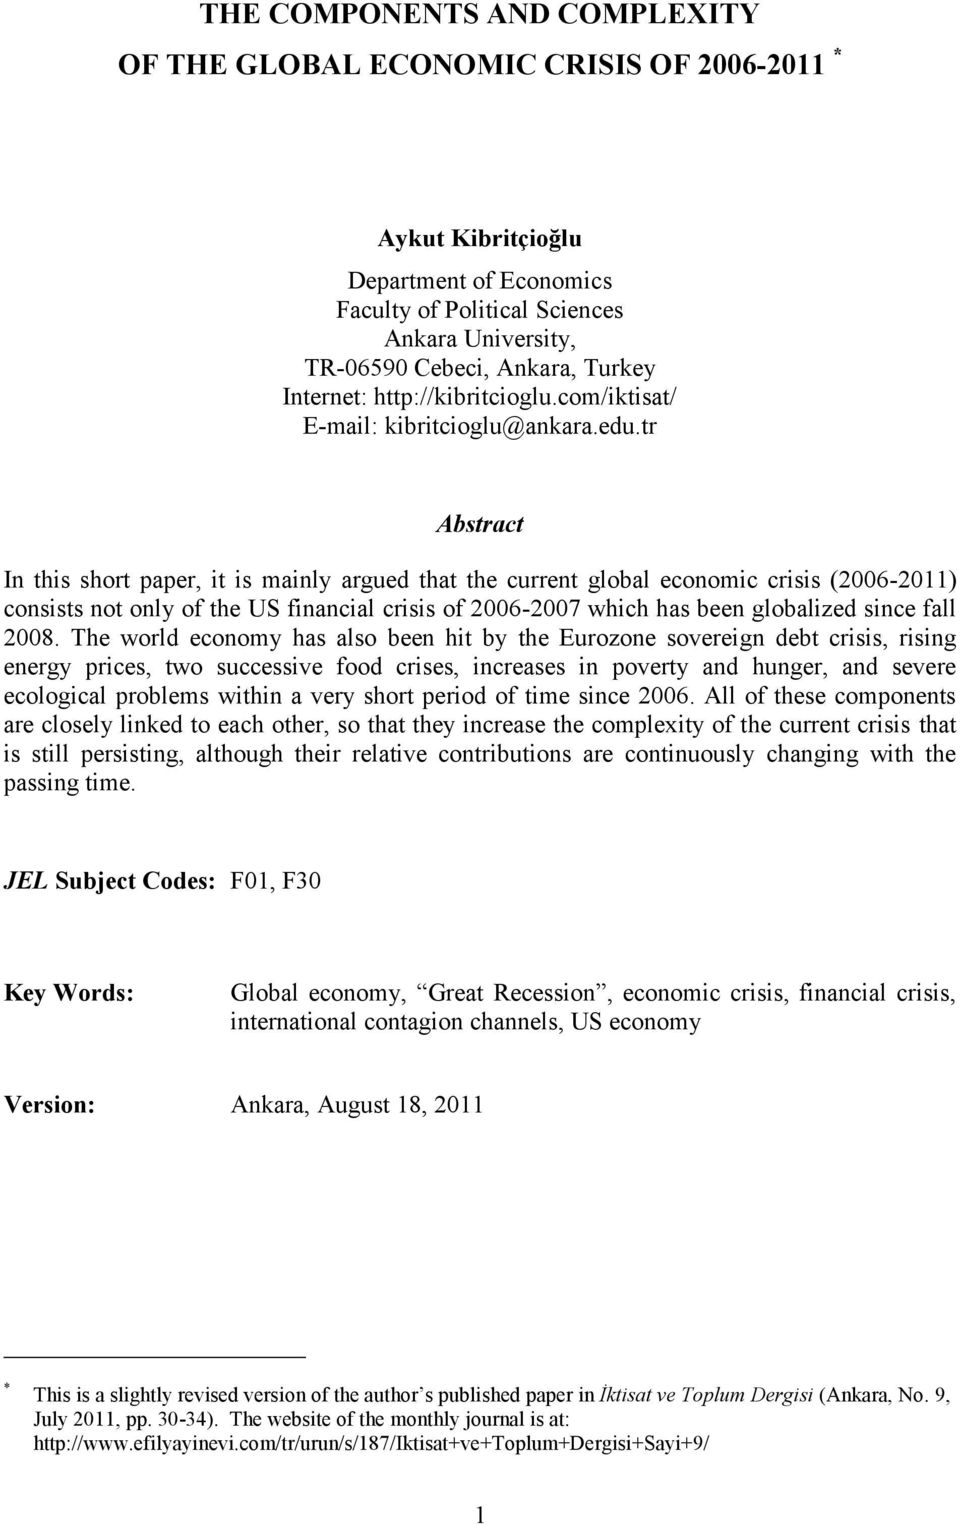 tr Abstract In this short paper, it is mainly argued that the current global economic crisis (2006-2011) consists not only of the US financial crisis of 2006-2007 which has been globalized since fall